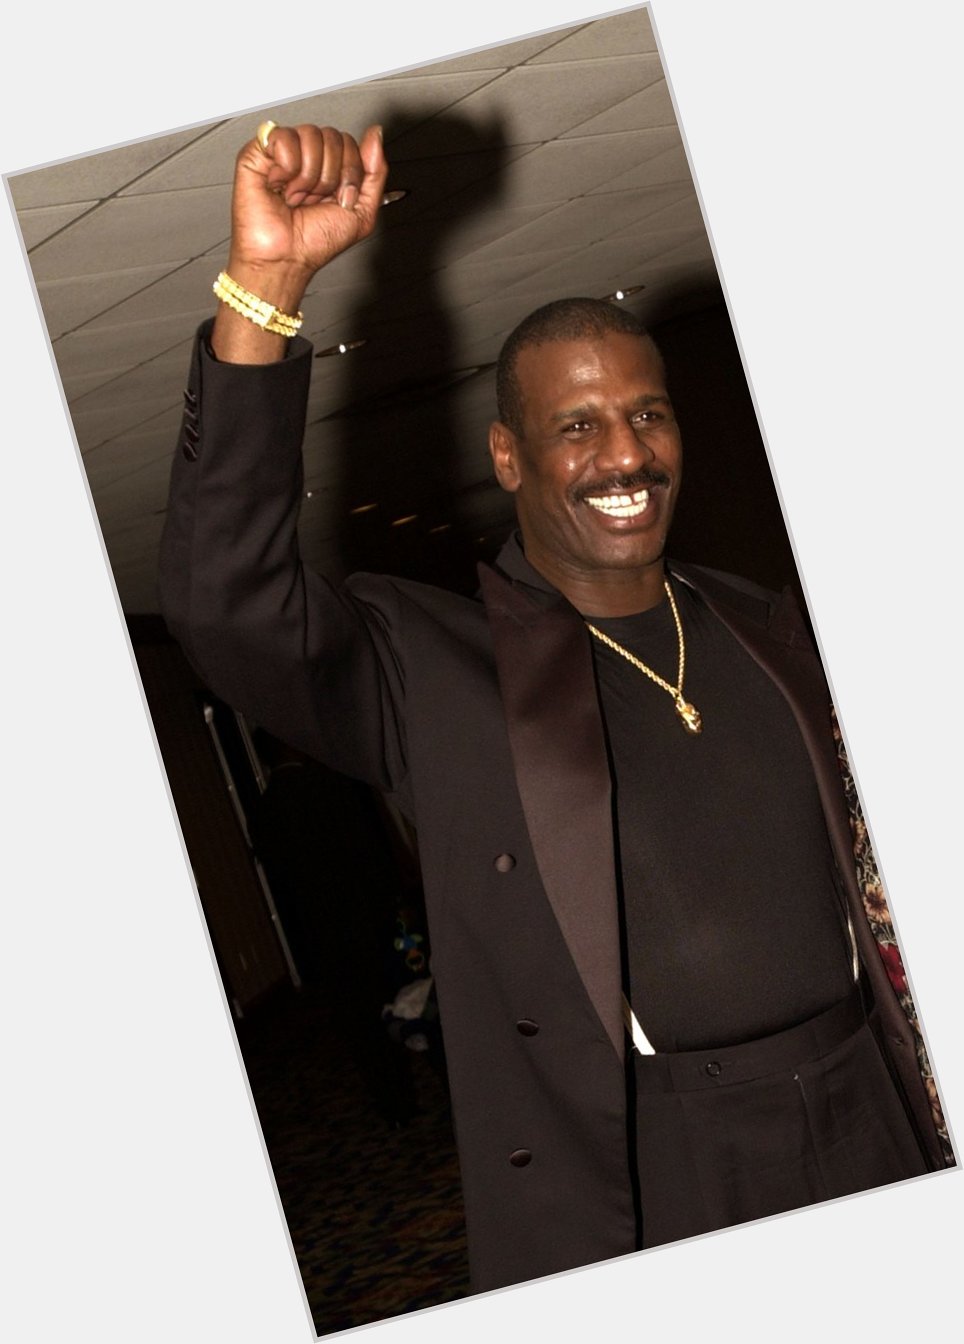 Happy birthday to 1976 Olympic Medalist, Michael Spinks!  